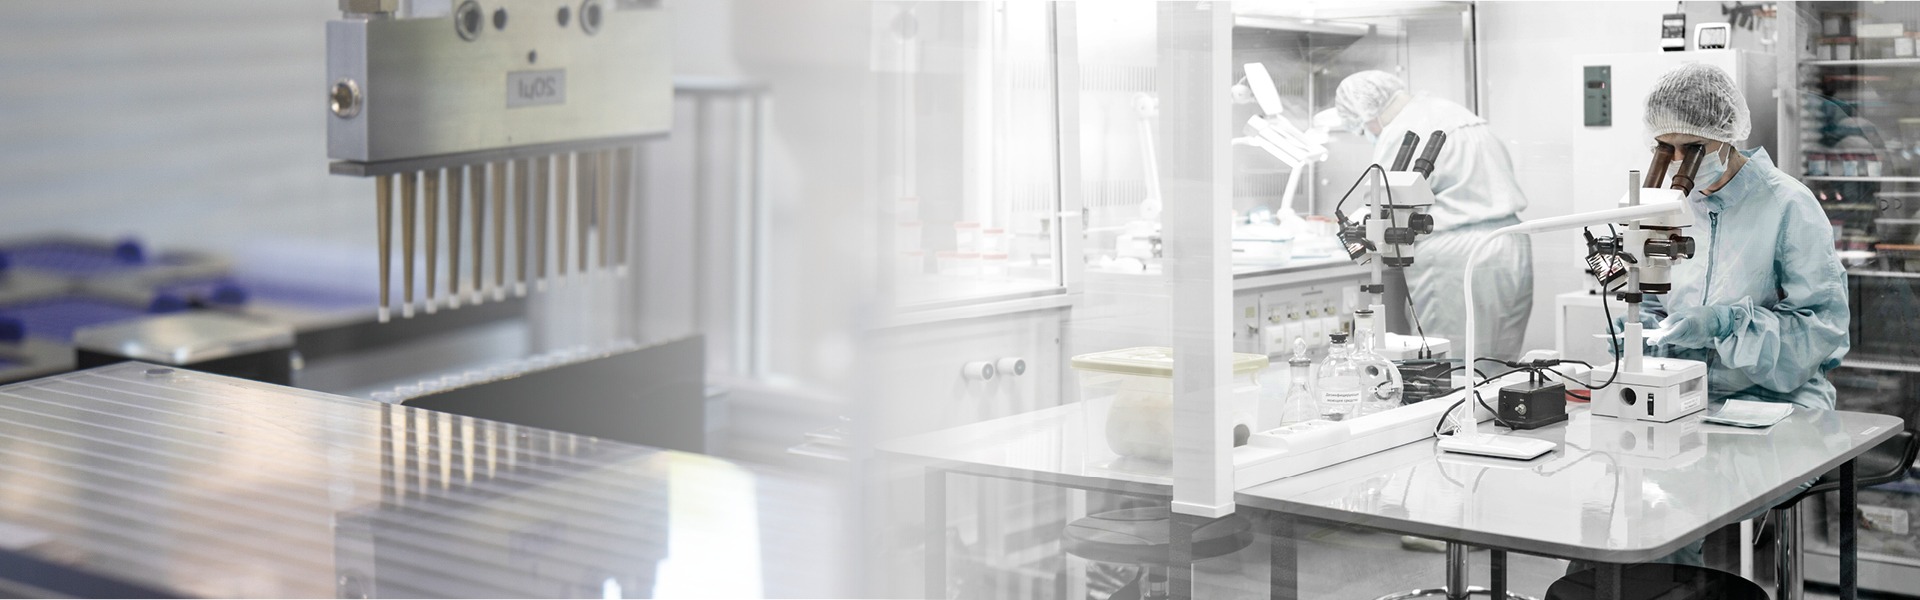 AHN Biotechnologie GmbH: Your Innovative Biotechnology Solutions|Home